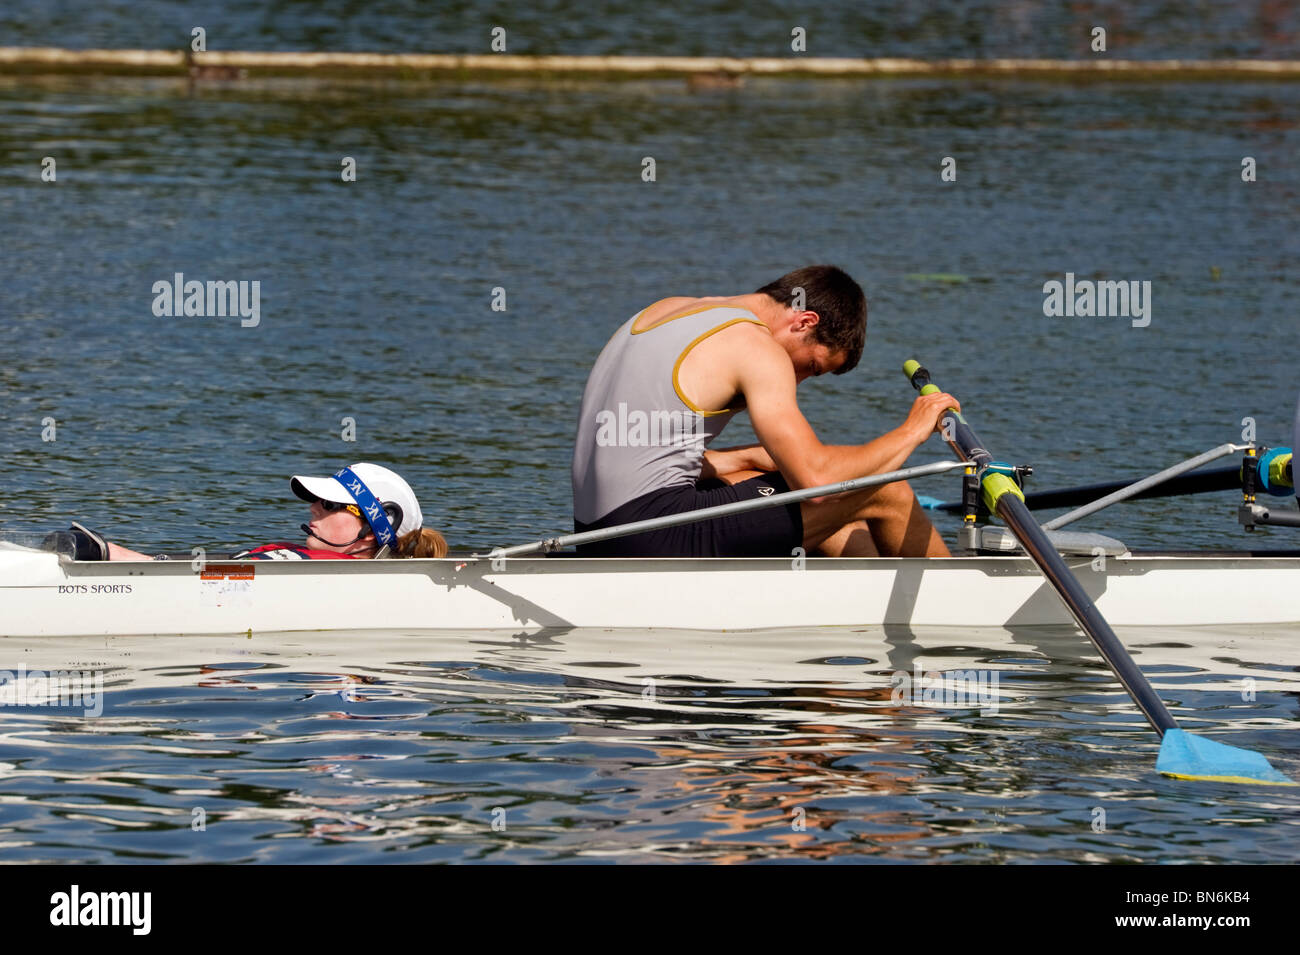 Coxswain (cox for short) and rower relax just before the start of a race at Henley Royal Regatta. Stock Photo